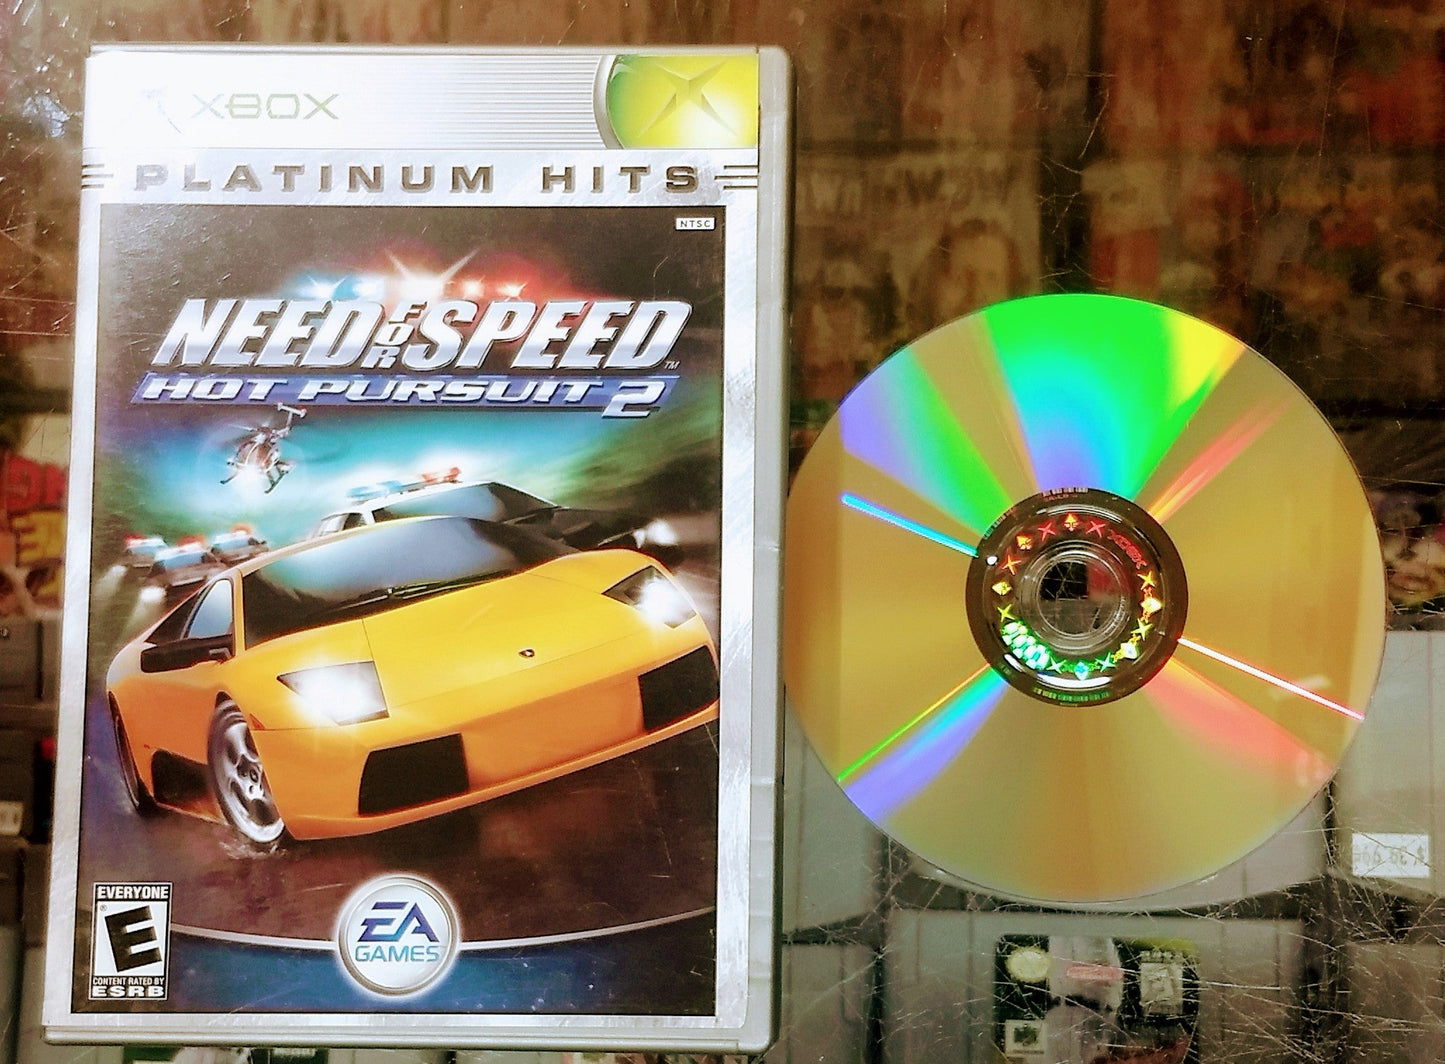 NEED FOR SPEED NFS HOT PURSUIT 2 PLATINUM HITS (XBOX) - jeux video game-x